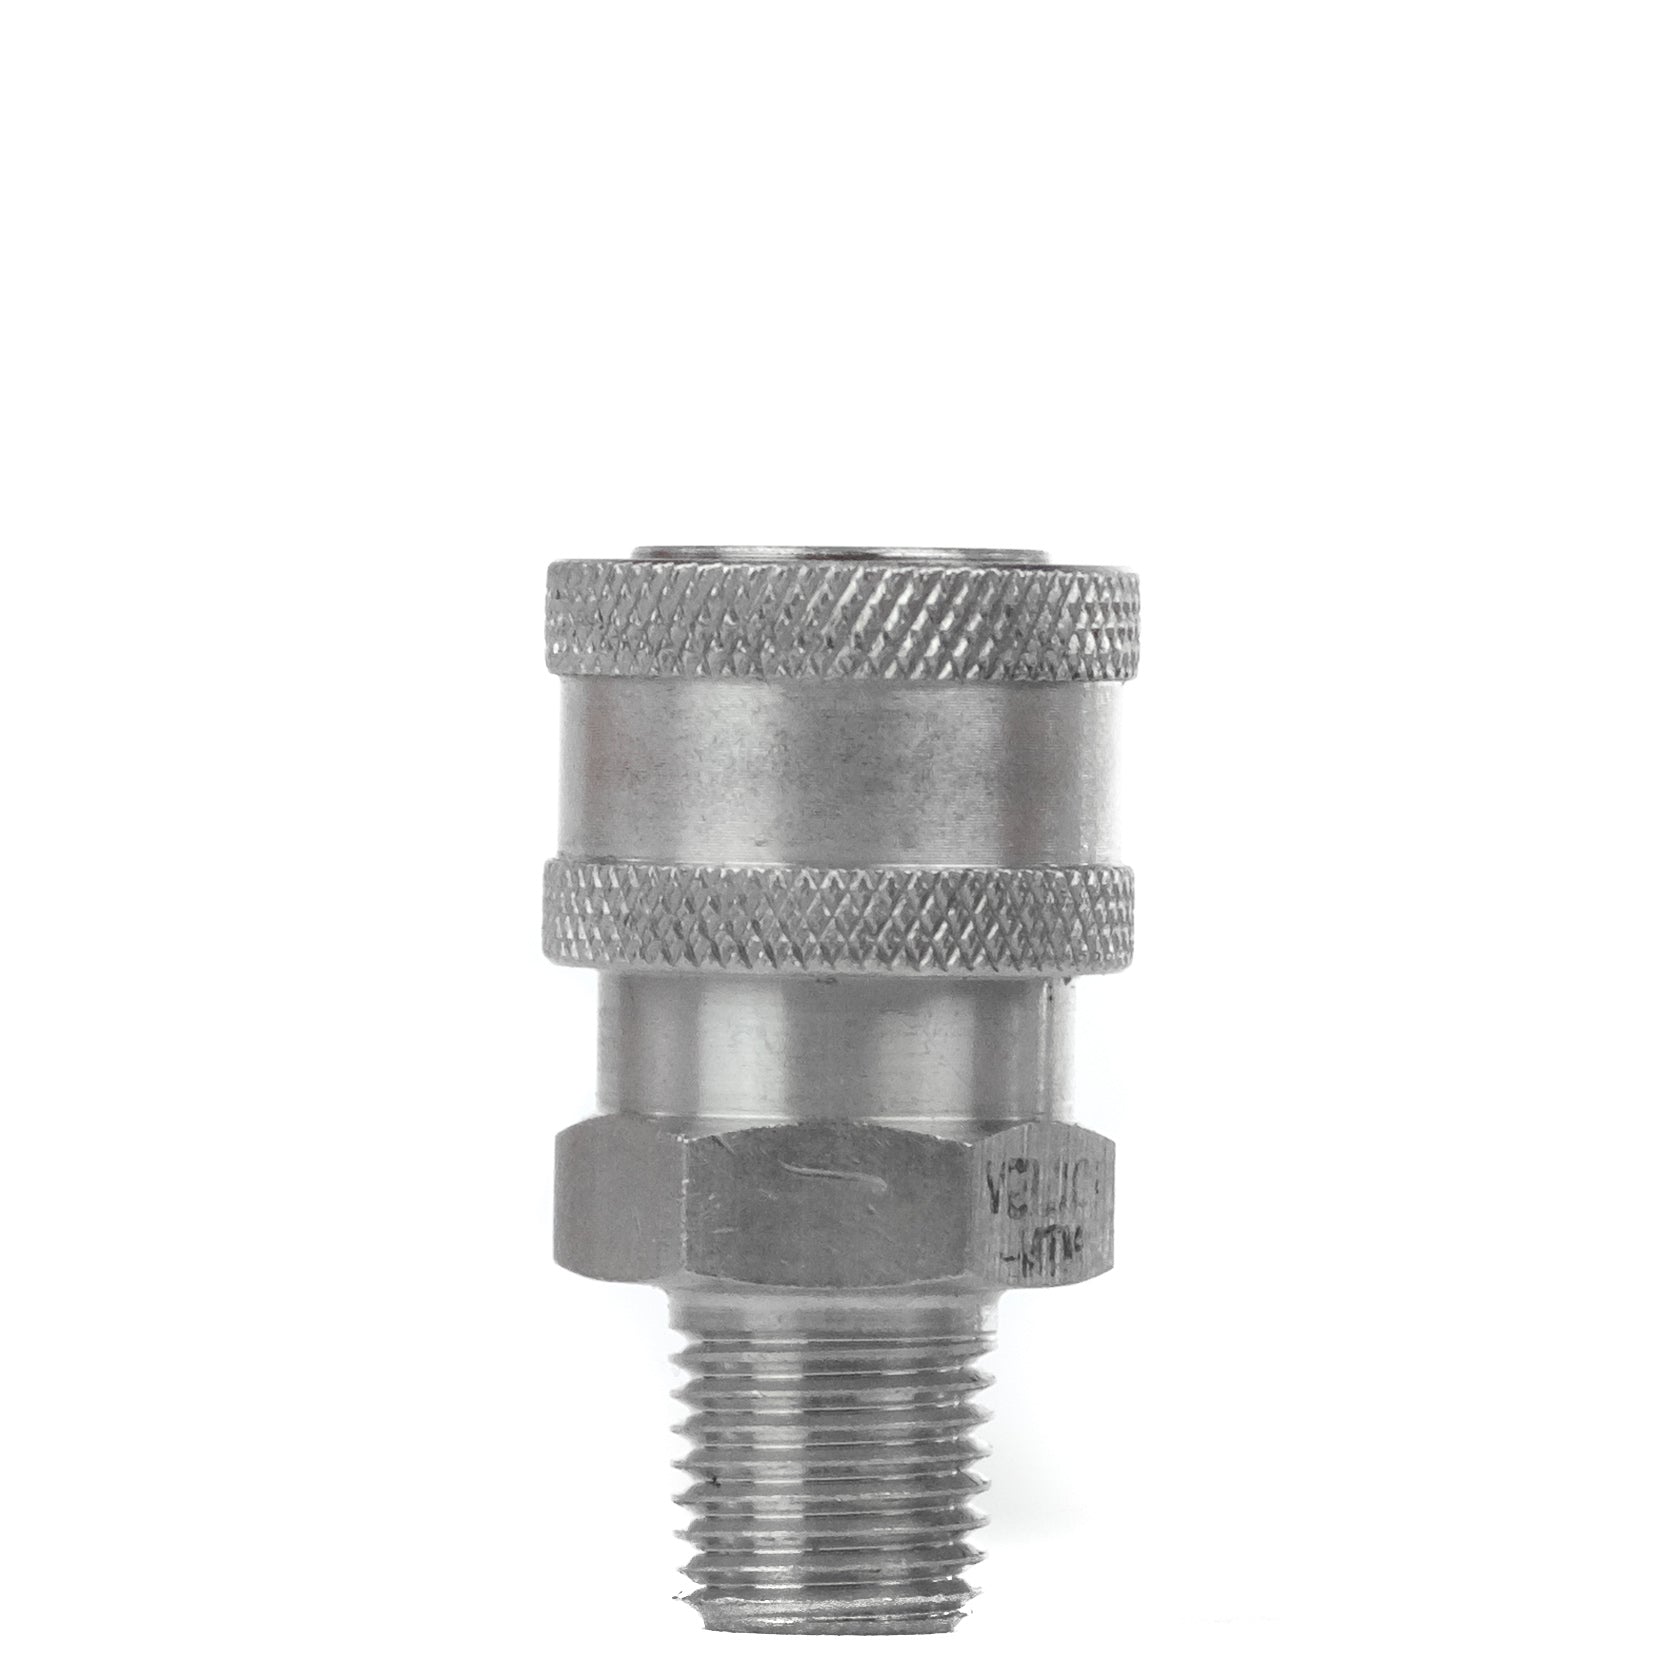 1/4" Male Thread QC Coupler-Stainless - Chem-X